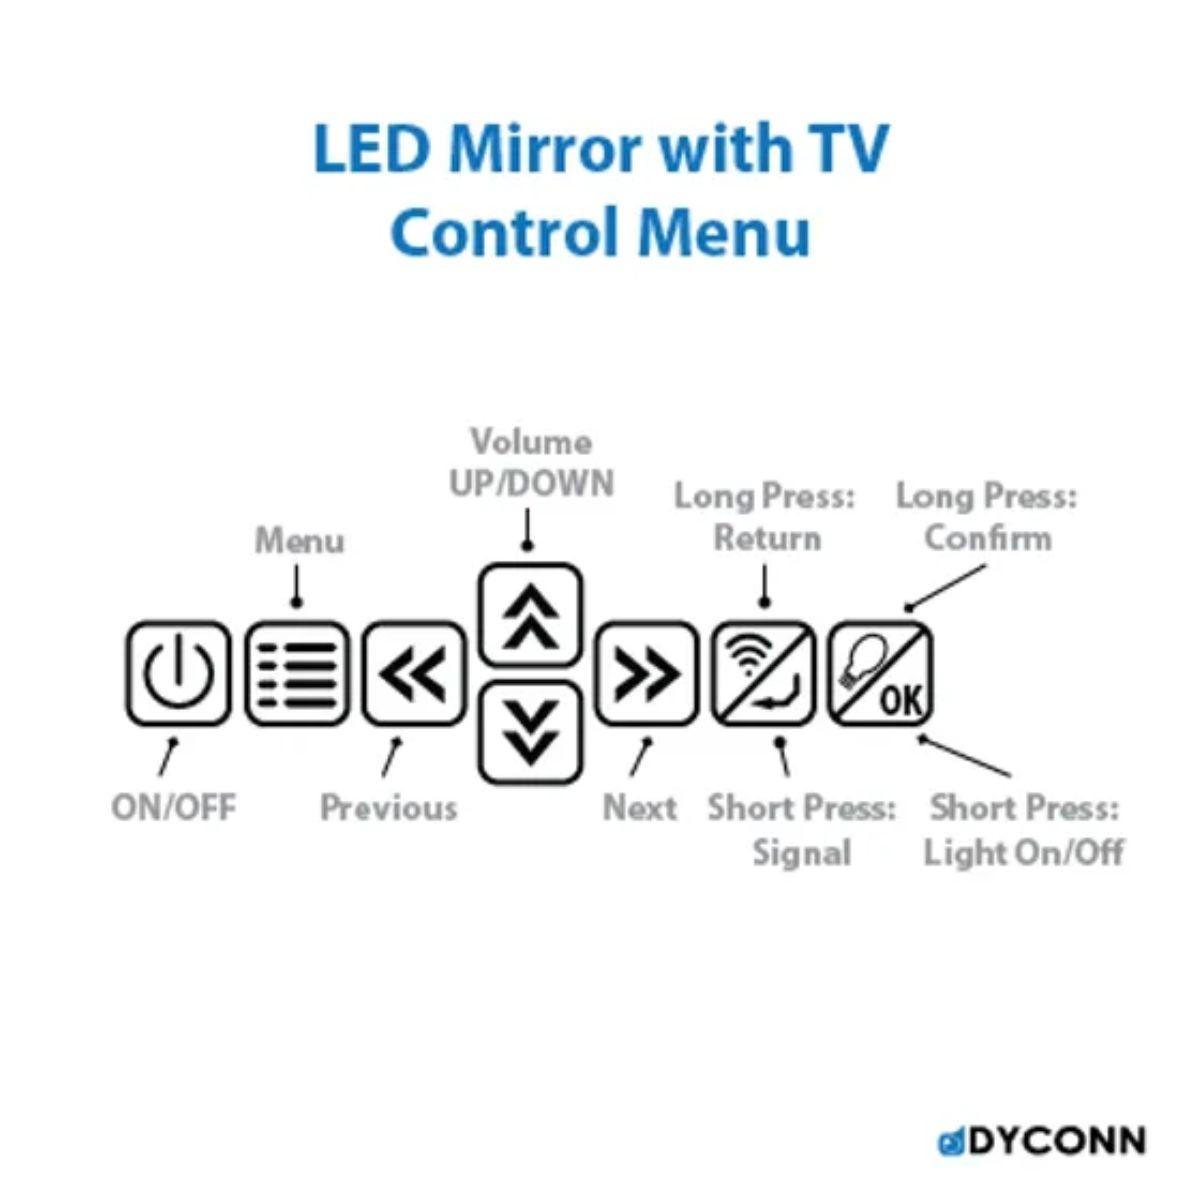 Edison Crystal 48 In. X 36 In. LED Wall Mirror With 13.3 in. LCD Television and Touch On/Off Dimmer Function